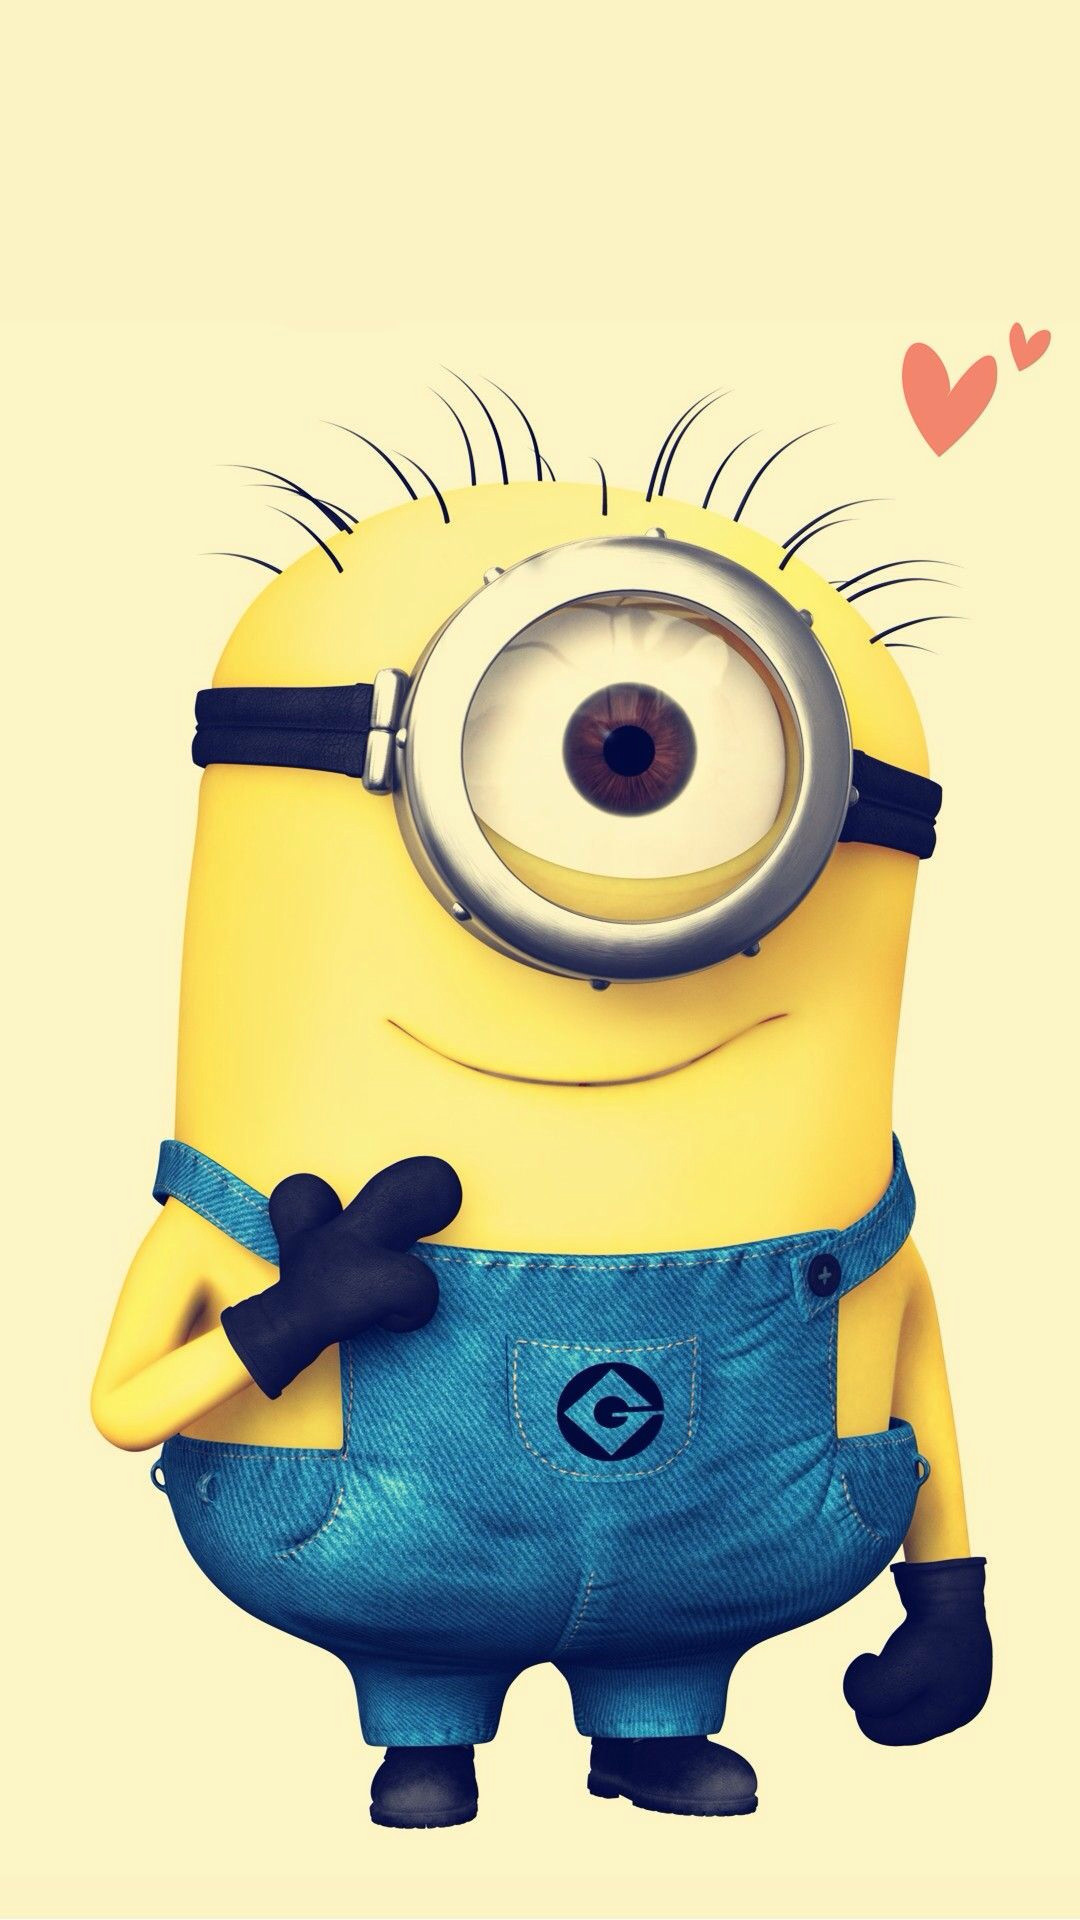 1080x1920 Today New Funny Minions pictures PM, Sunday September 2015 PDT) 10 pics